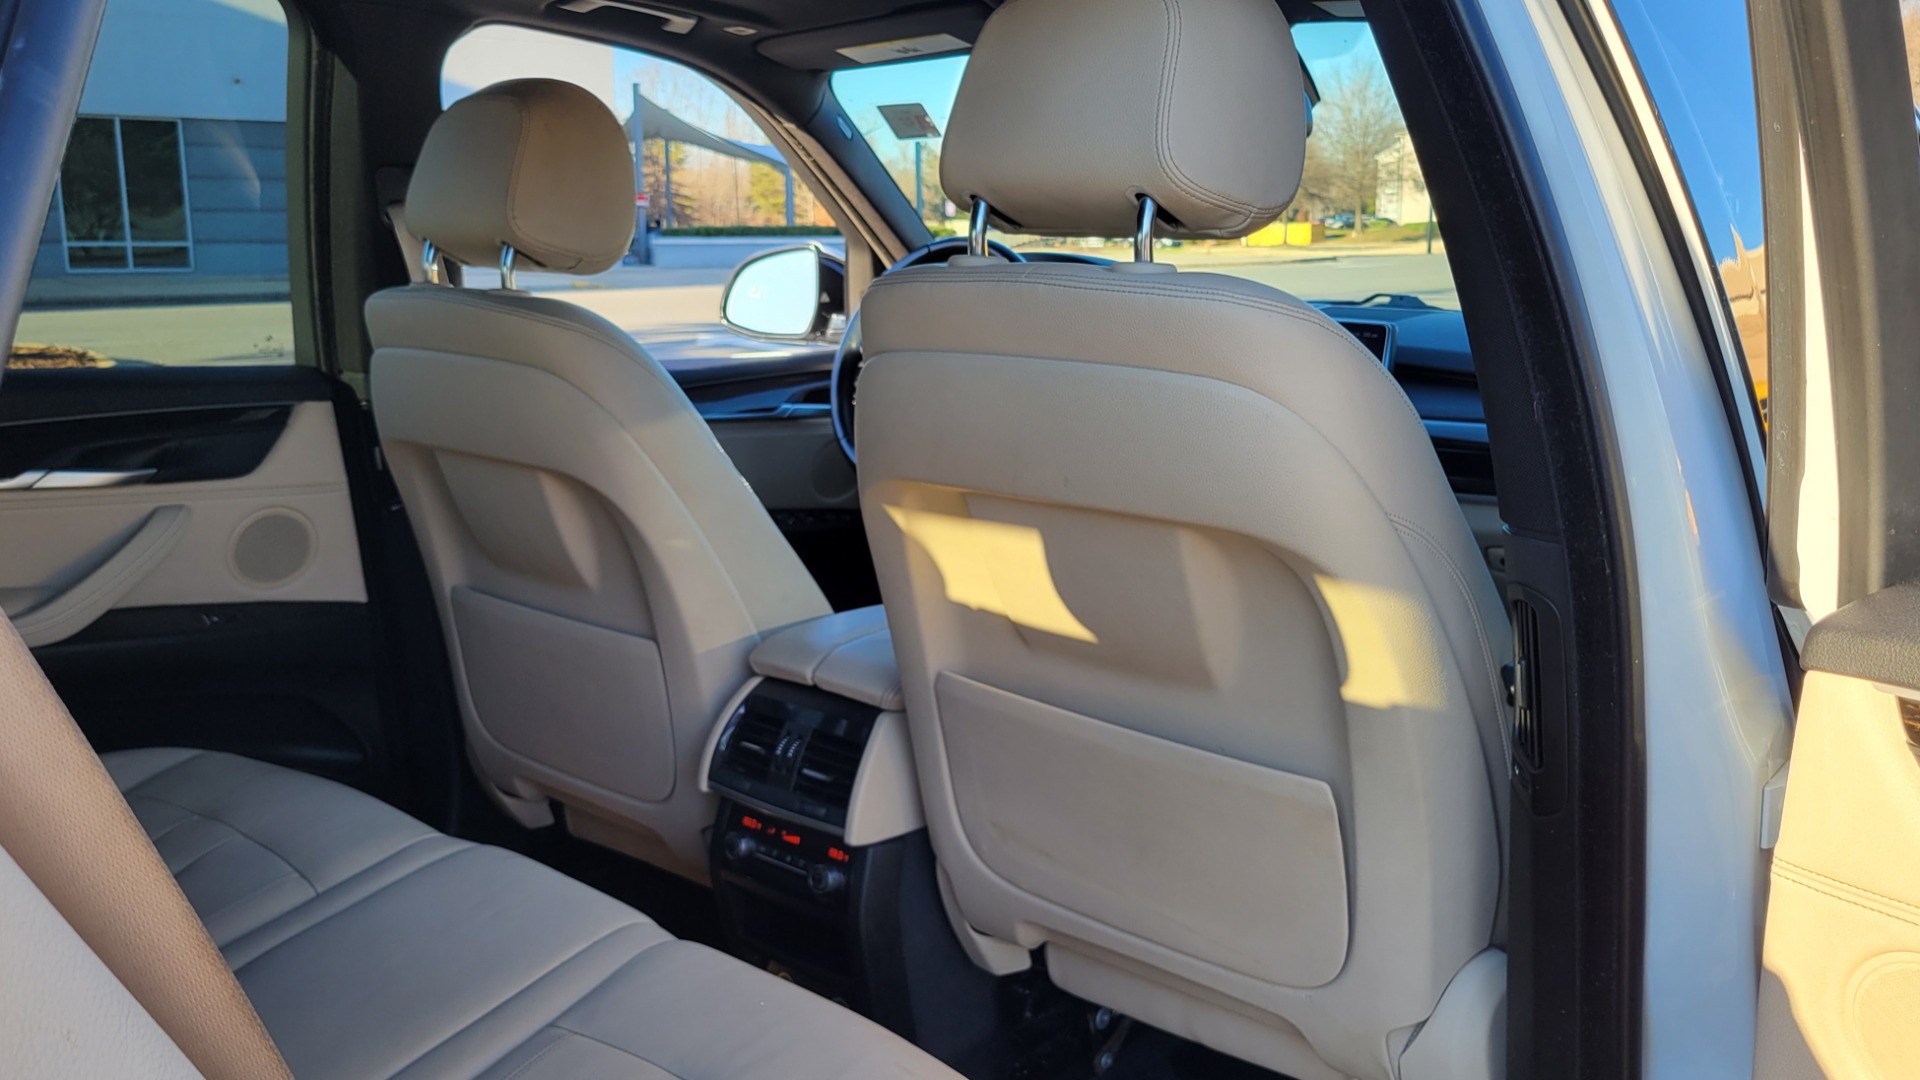 Used 2018 BMW X5 XDRIVE35I PREMIUM / DRVR ASST / HUD / WIRELESS CHARGING / HEATED SEATS for sale $42,995 at Formula Imports in Charlotte NC 28227 73